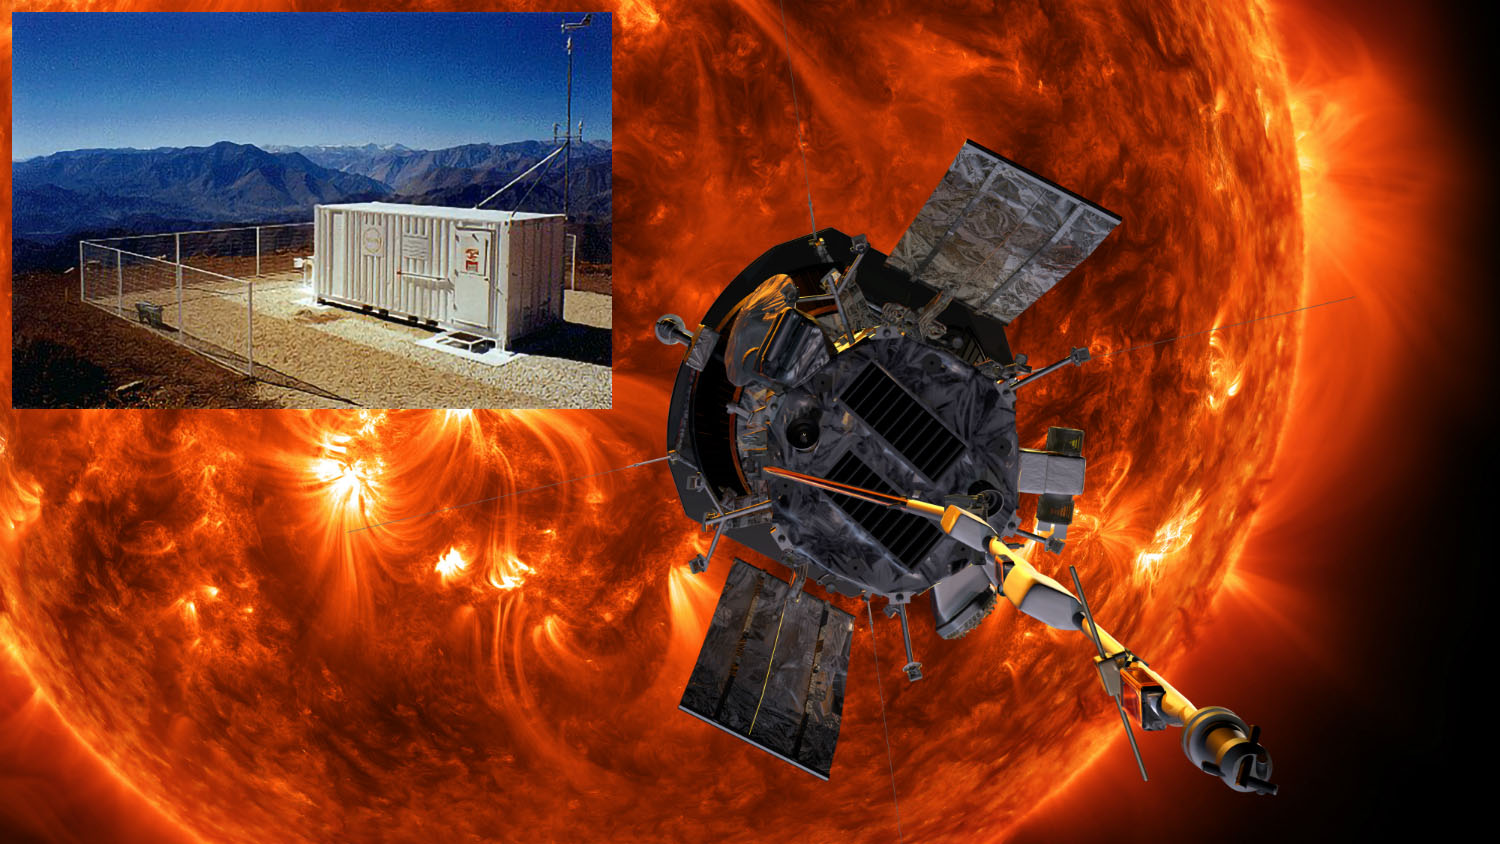 Illustration of Parker Solar Probe and one of the GONG stations at the Cerro Tololo Inter-American Observatory in Chile.